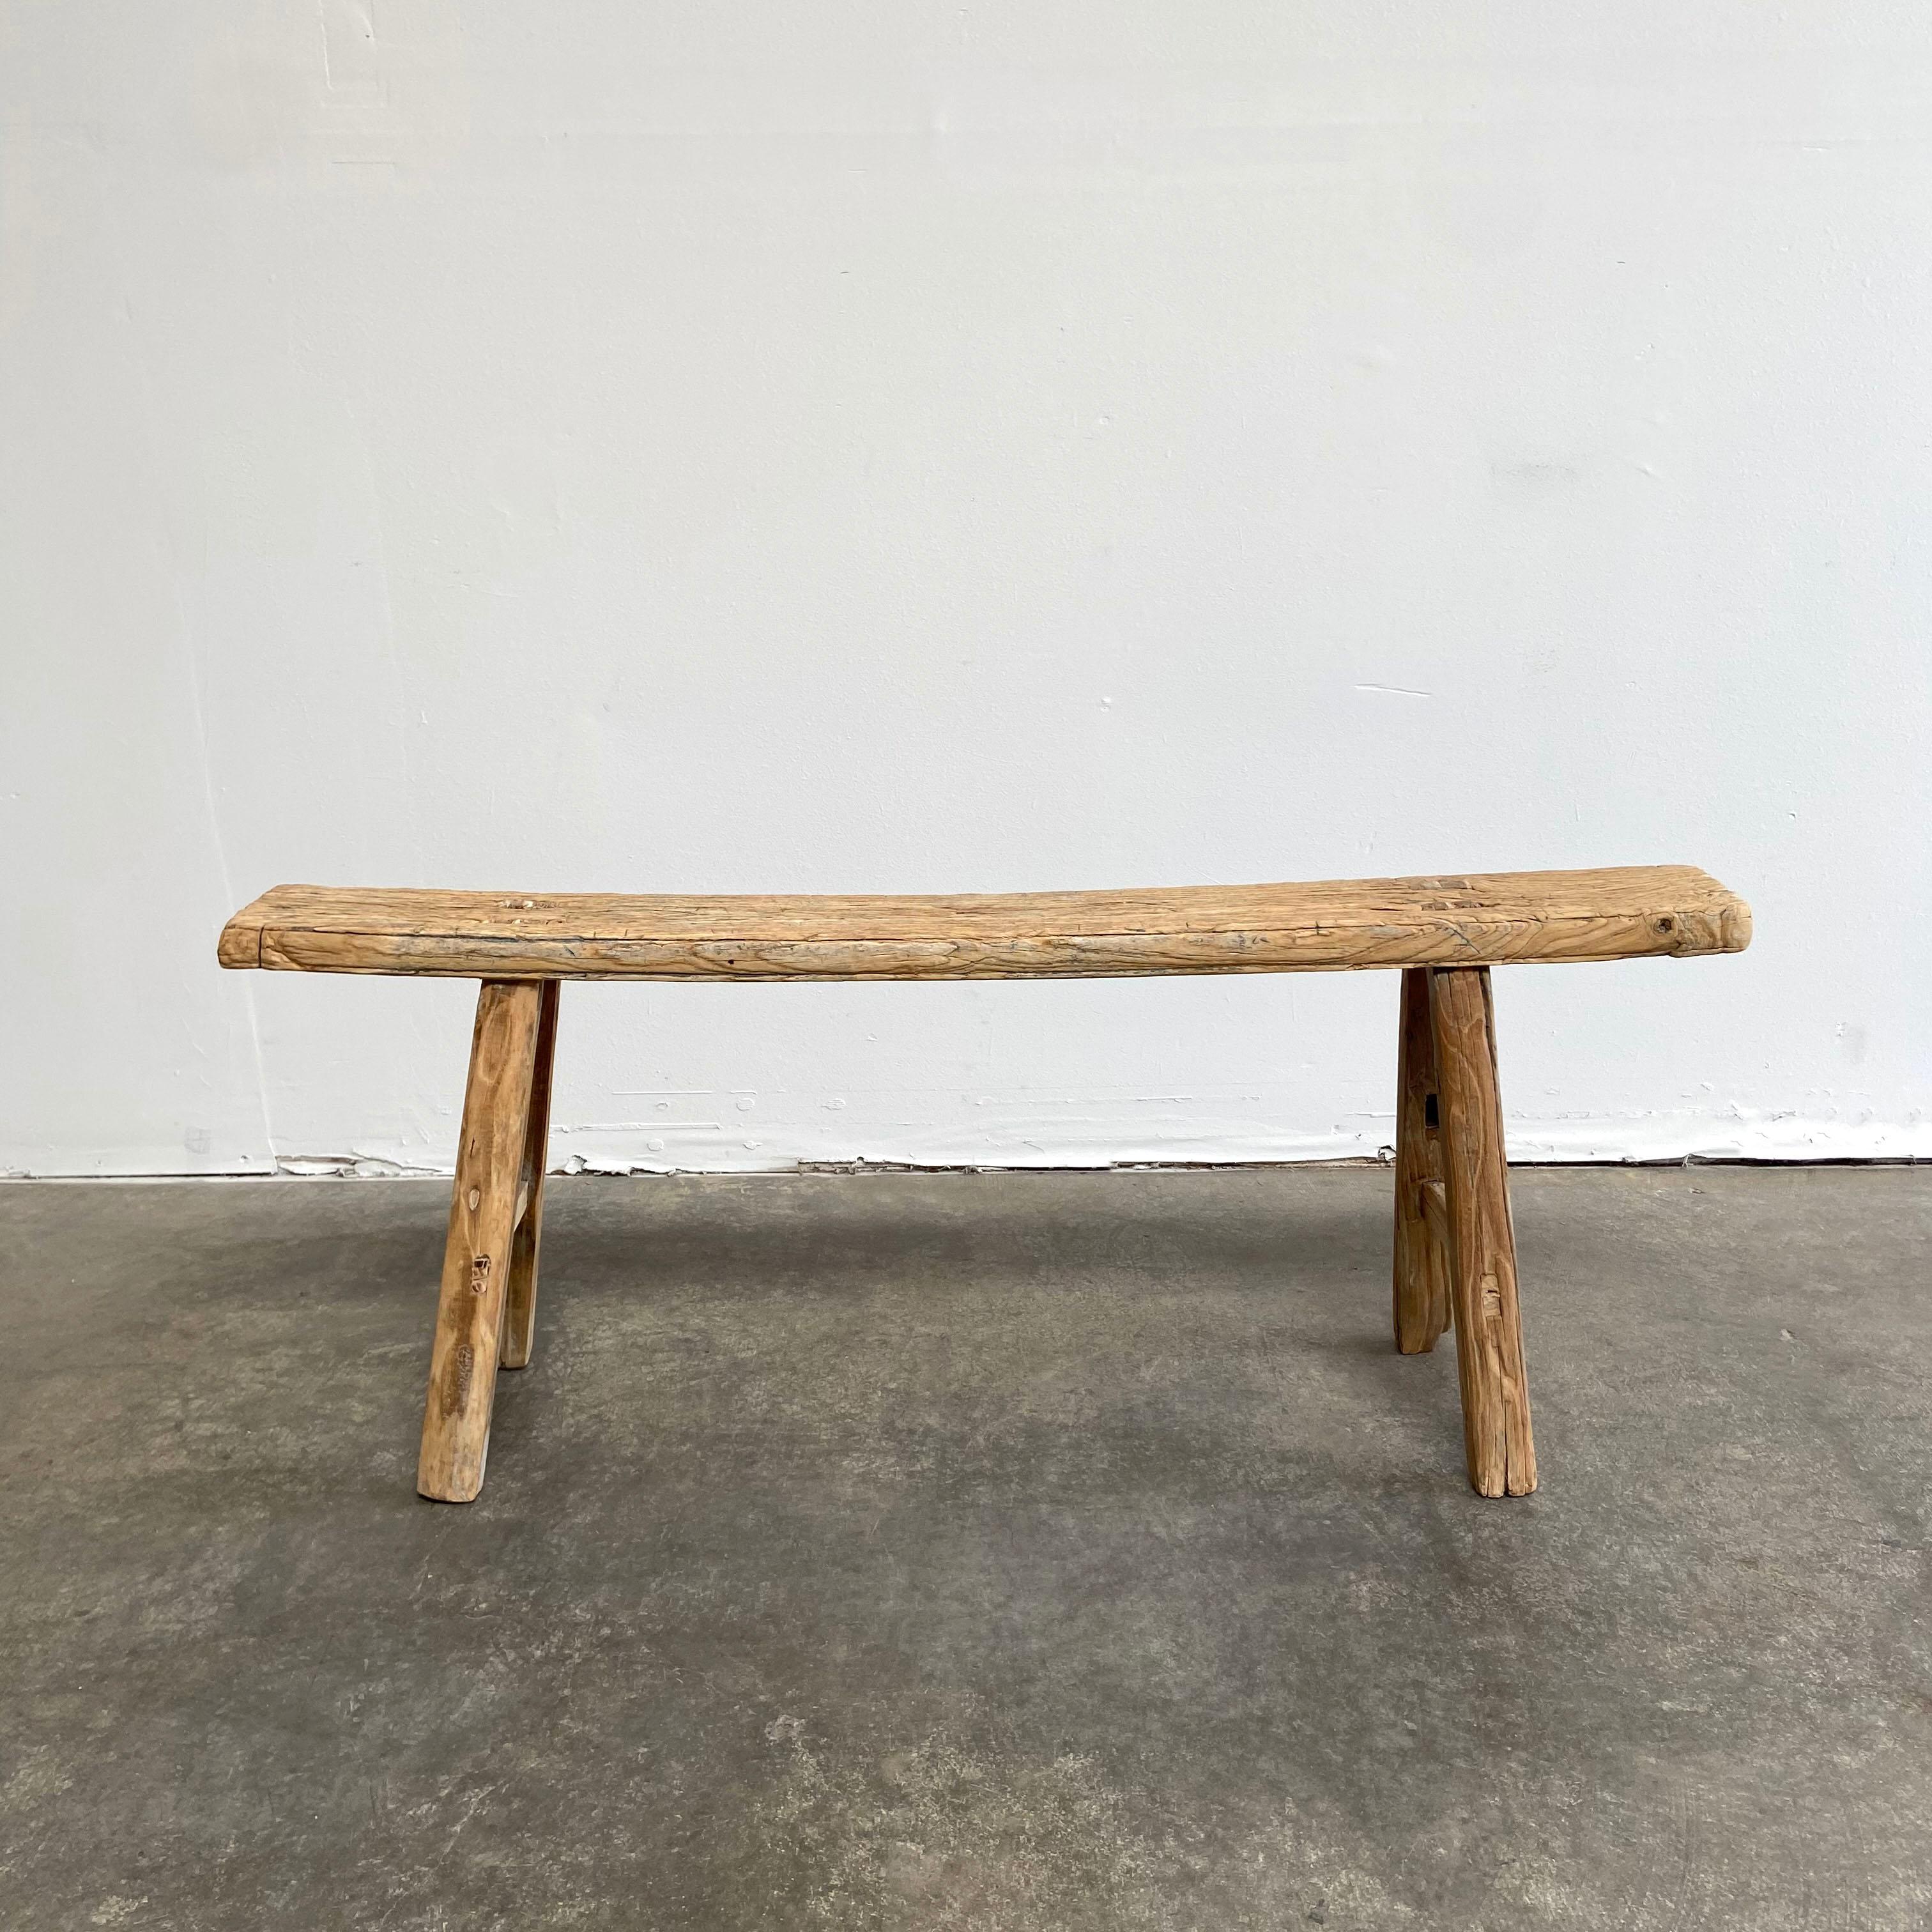 Vintage antique elm wood skinny bench
These are the real vintage antique elm wood benches! Beautiful antique patina, with weathering and age, these are solid and sturdy ready for daily use, use as as a table behind a sofa, stool, coffee table, they